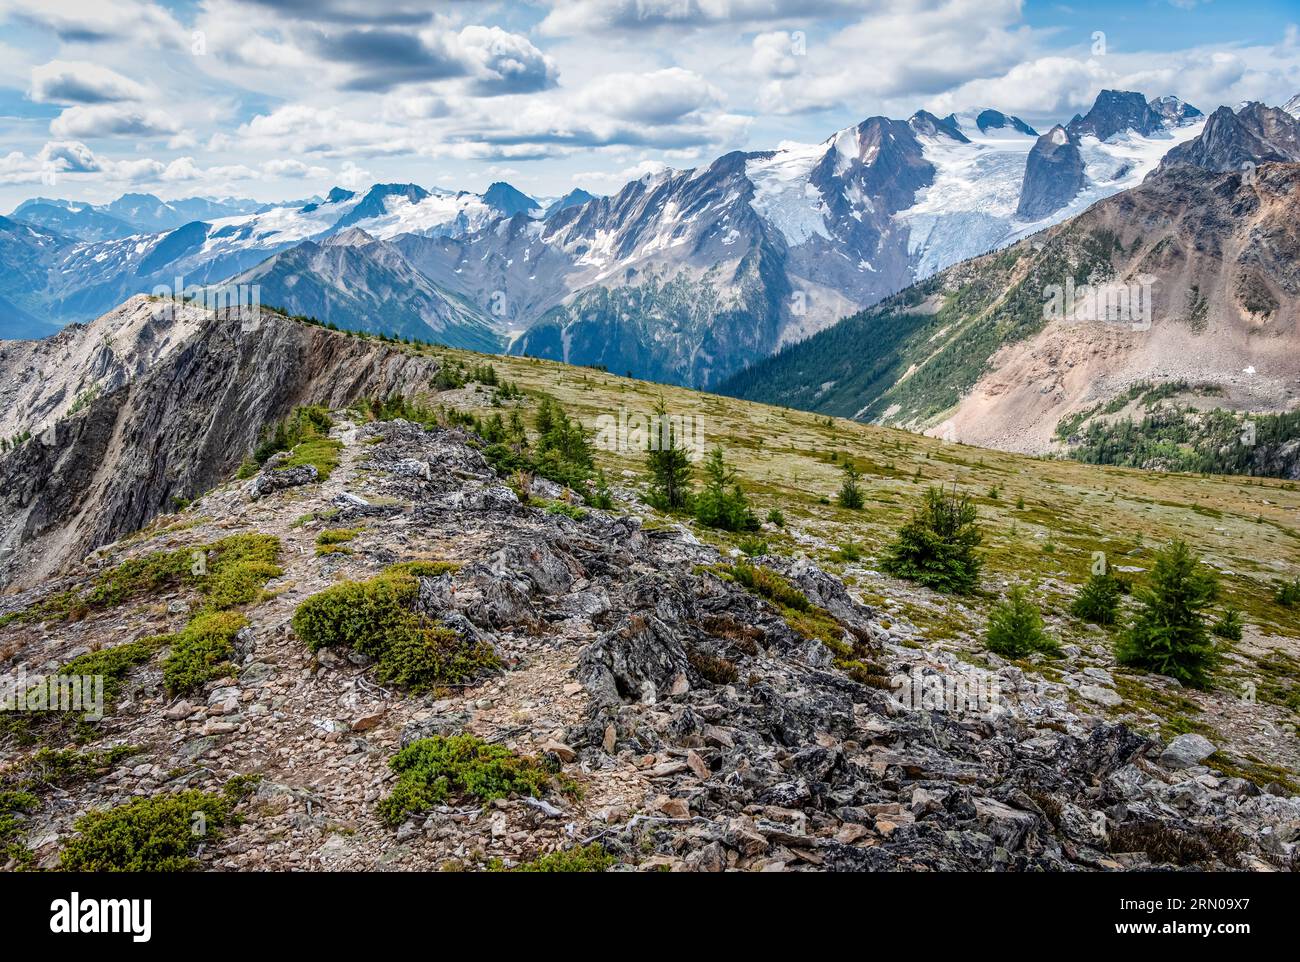 A rocky ridge in Bugaboo Provincial Park, BC overlooking Bugaboo Spire, glaciers, and other nearby peaks Stock Photo